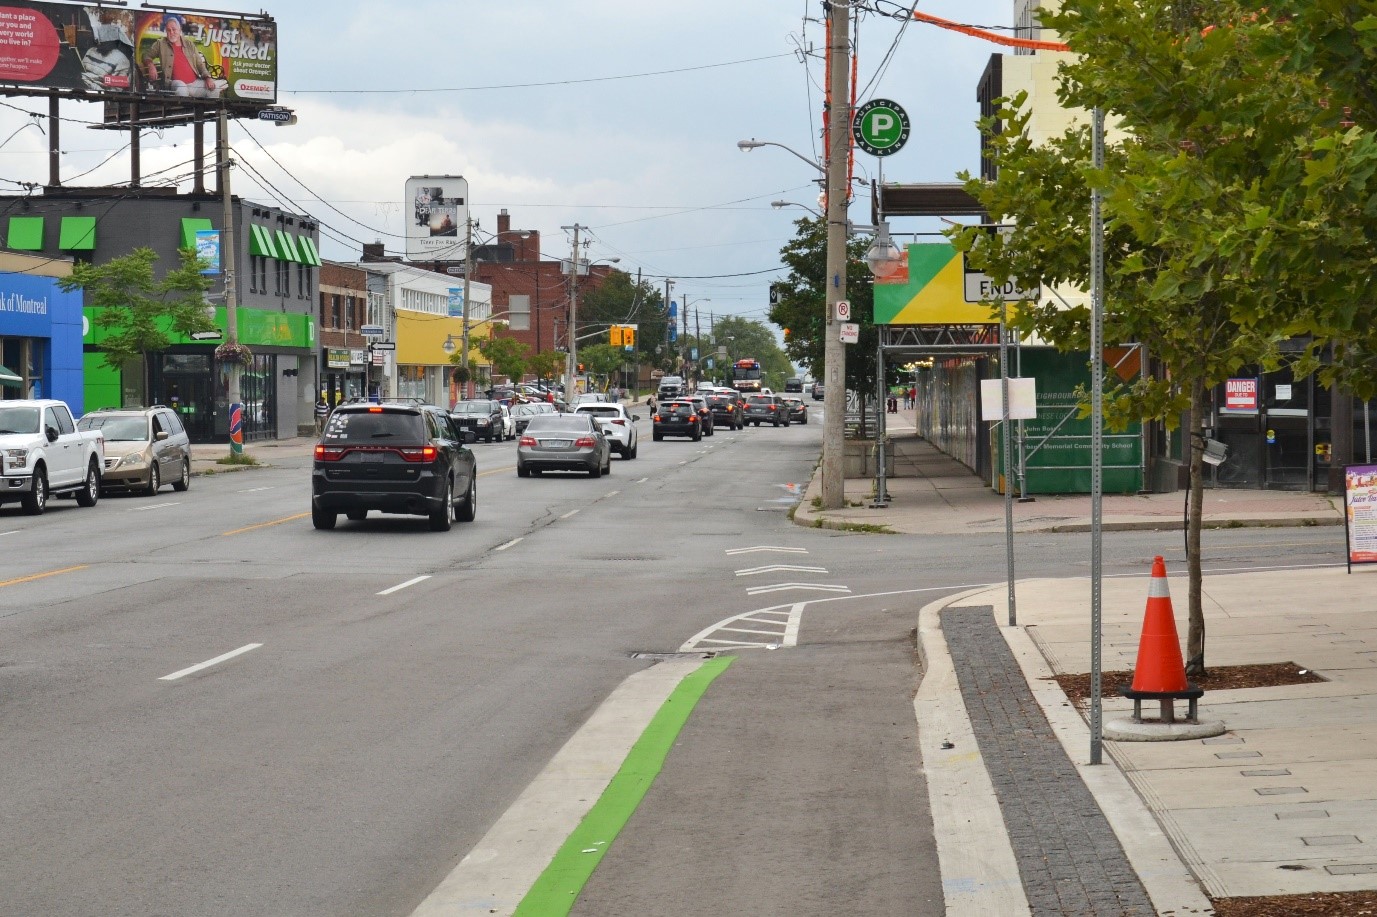 The Eglinton Crosstown project includes bike lanes, but execution has been patchy due to problems in institutional coordination.